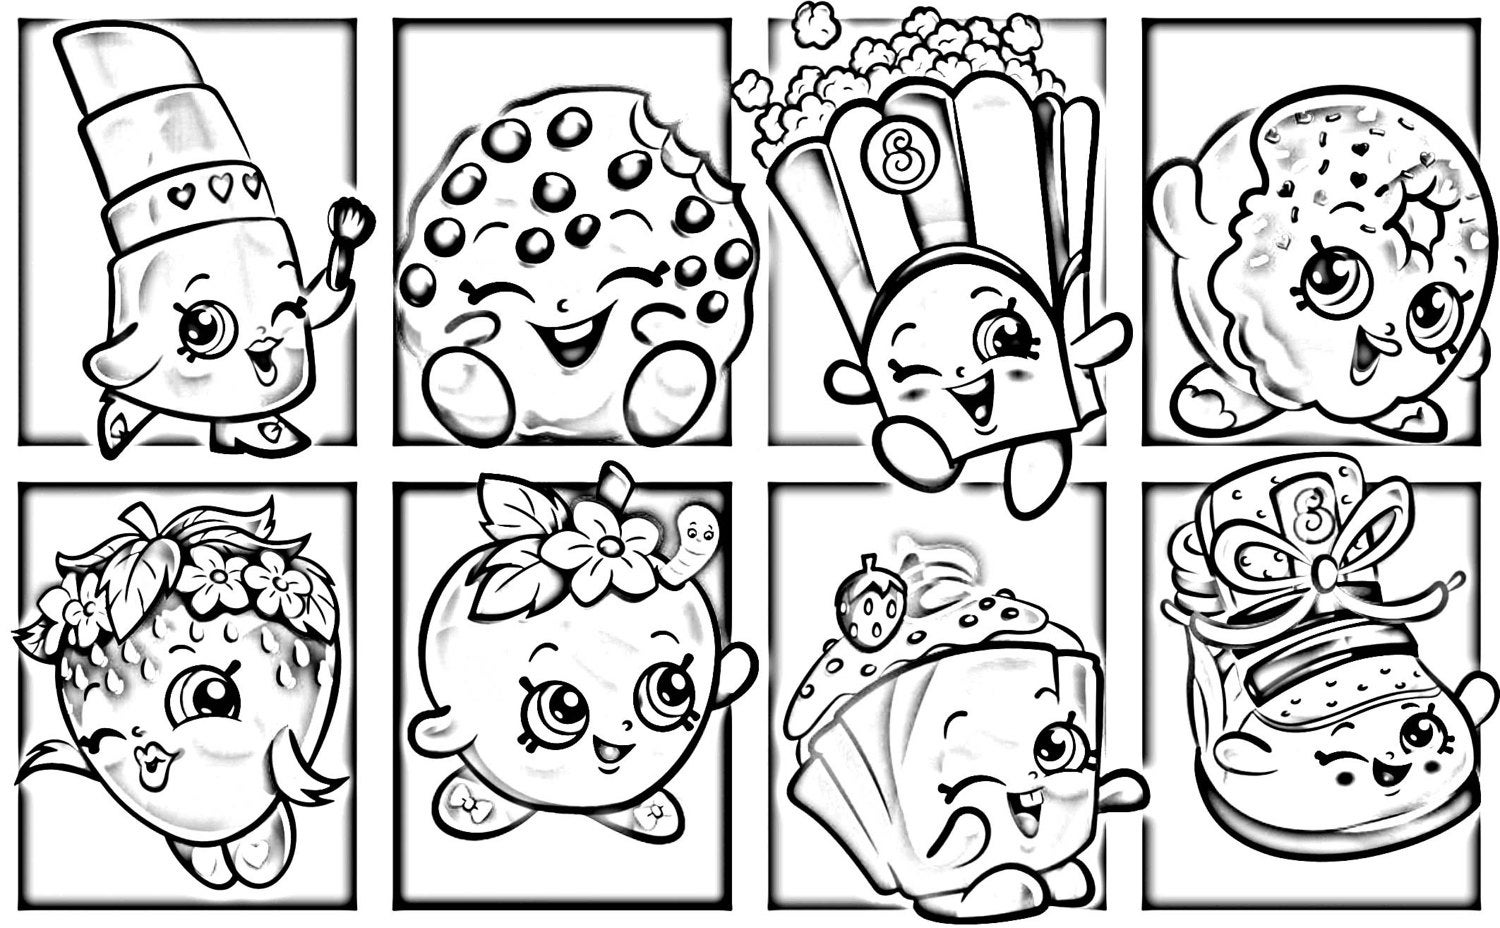 Shopkins Coloring Page